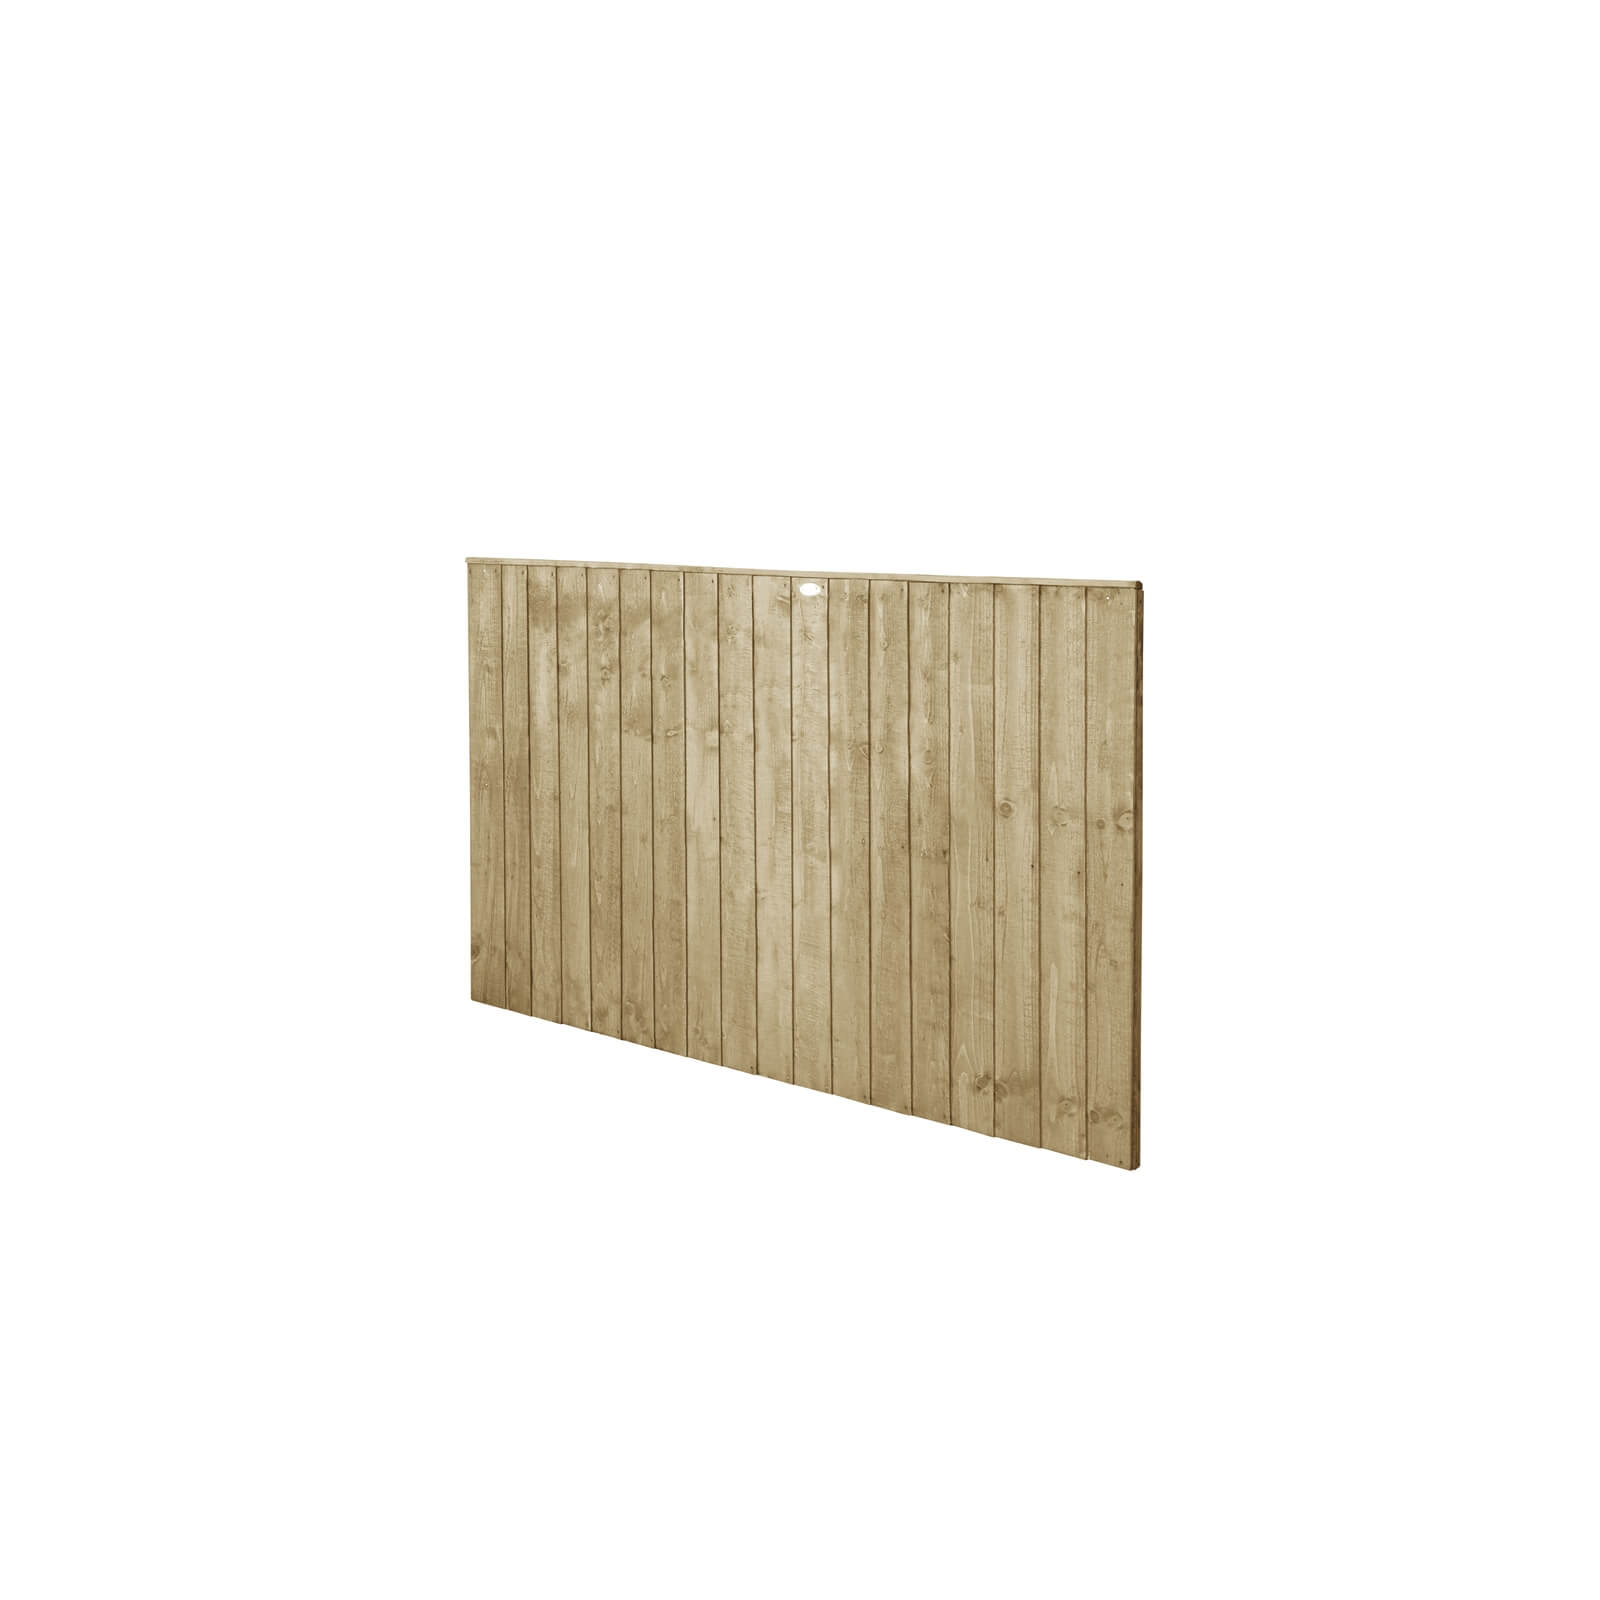 6ft x 4ft (1.83m x 1.23m) Pressure Treated Featheredge Fence Panel - Pack of 20